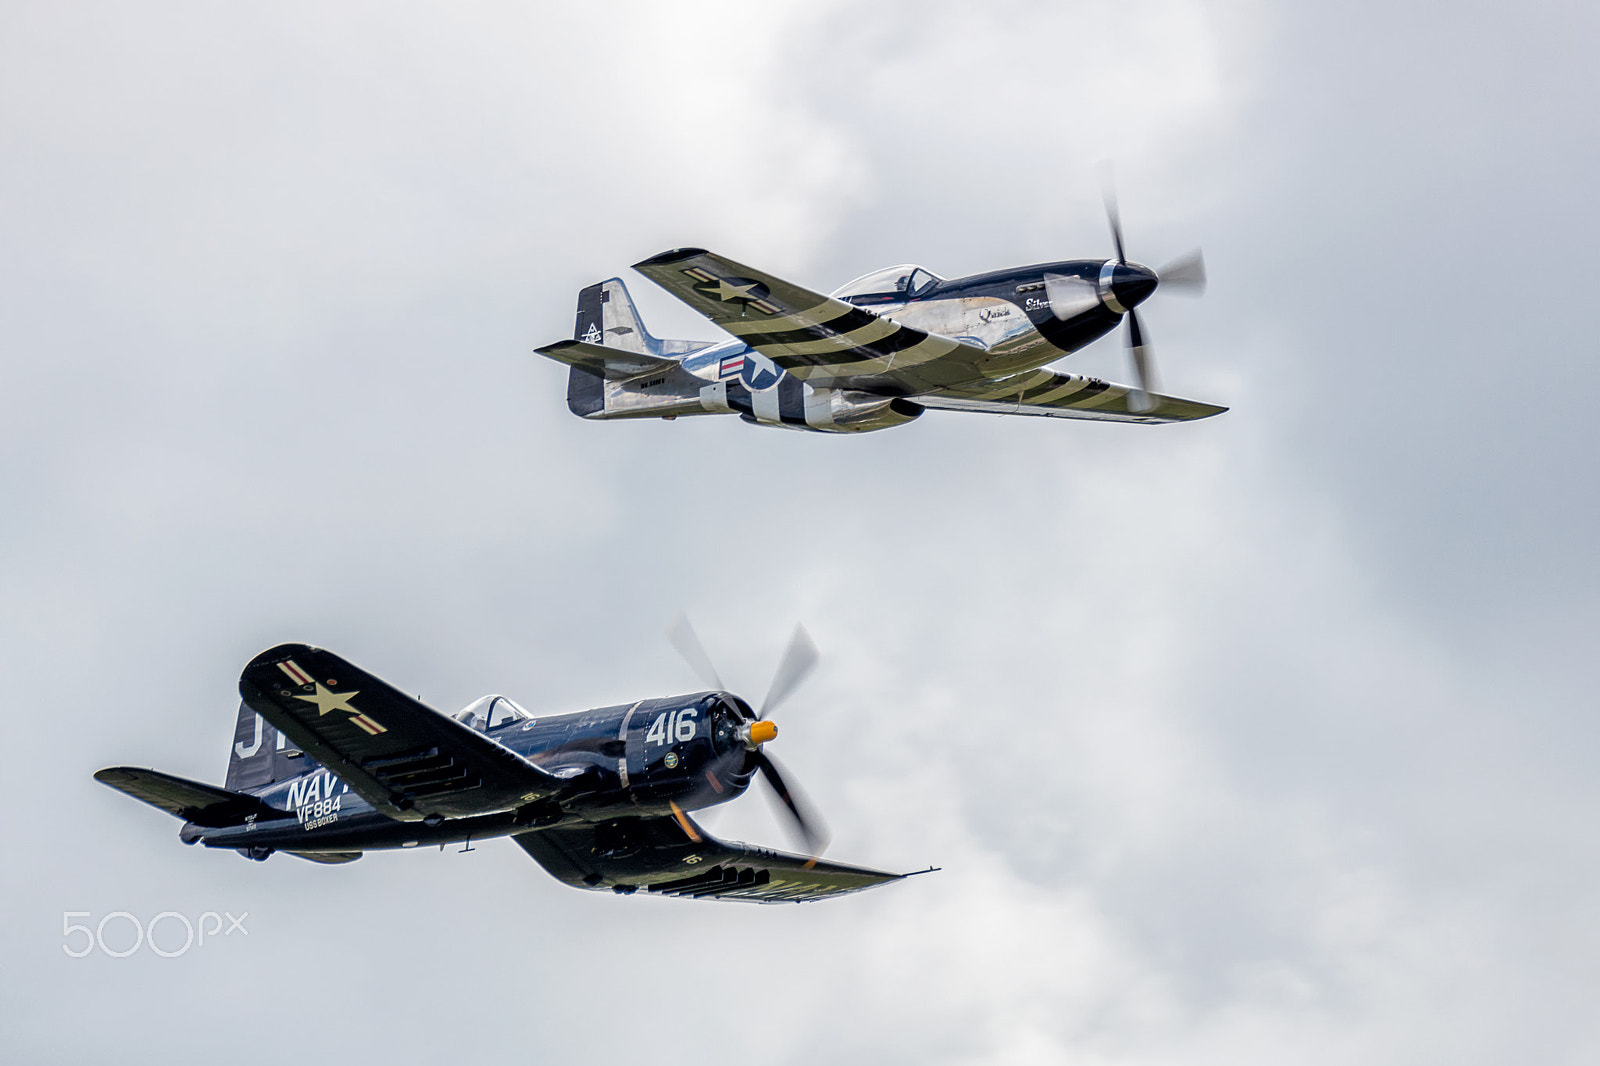 Canon EOS 5DS sample photo. F-4u corsair and p-51 mustang in flight 6 photography